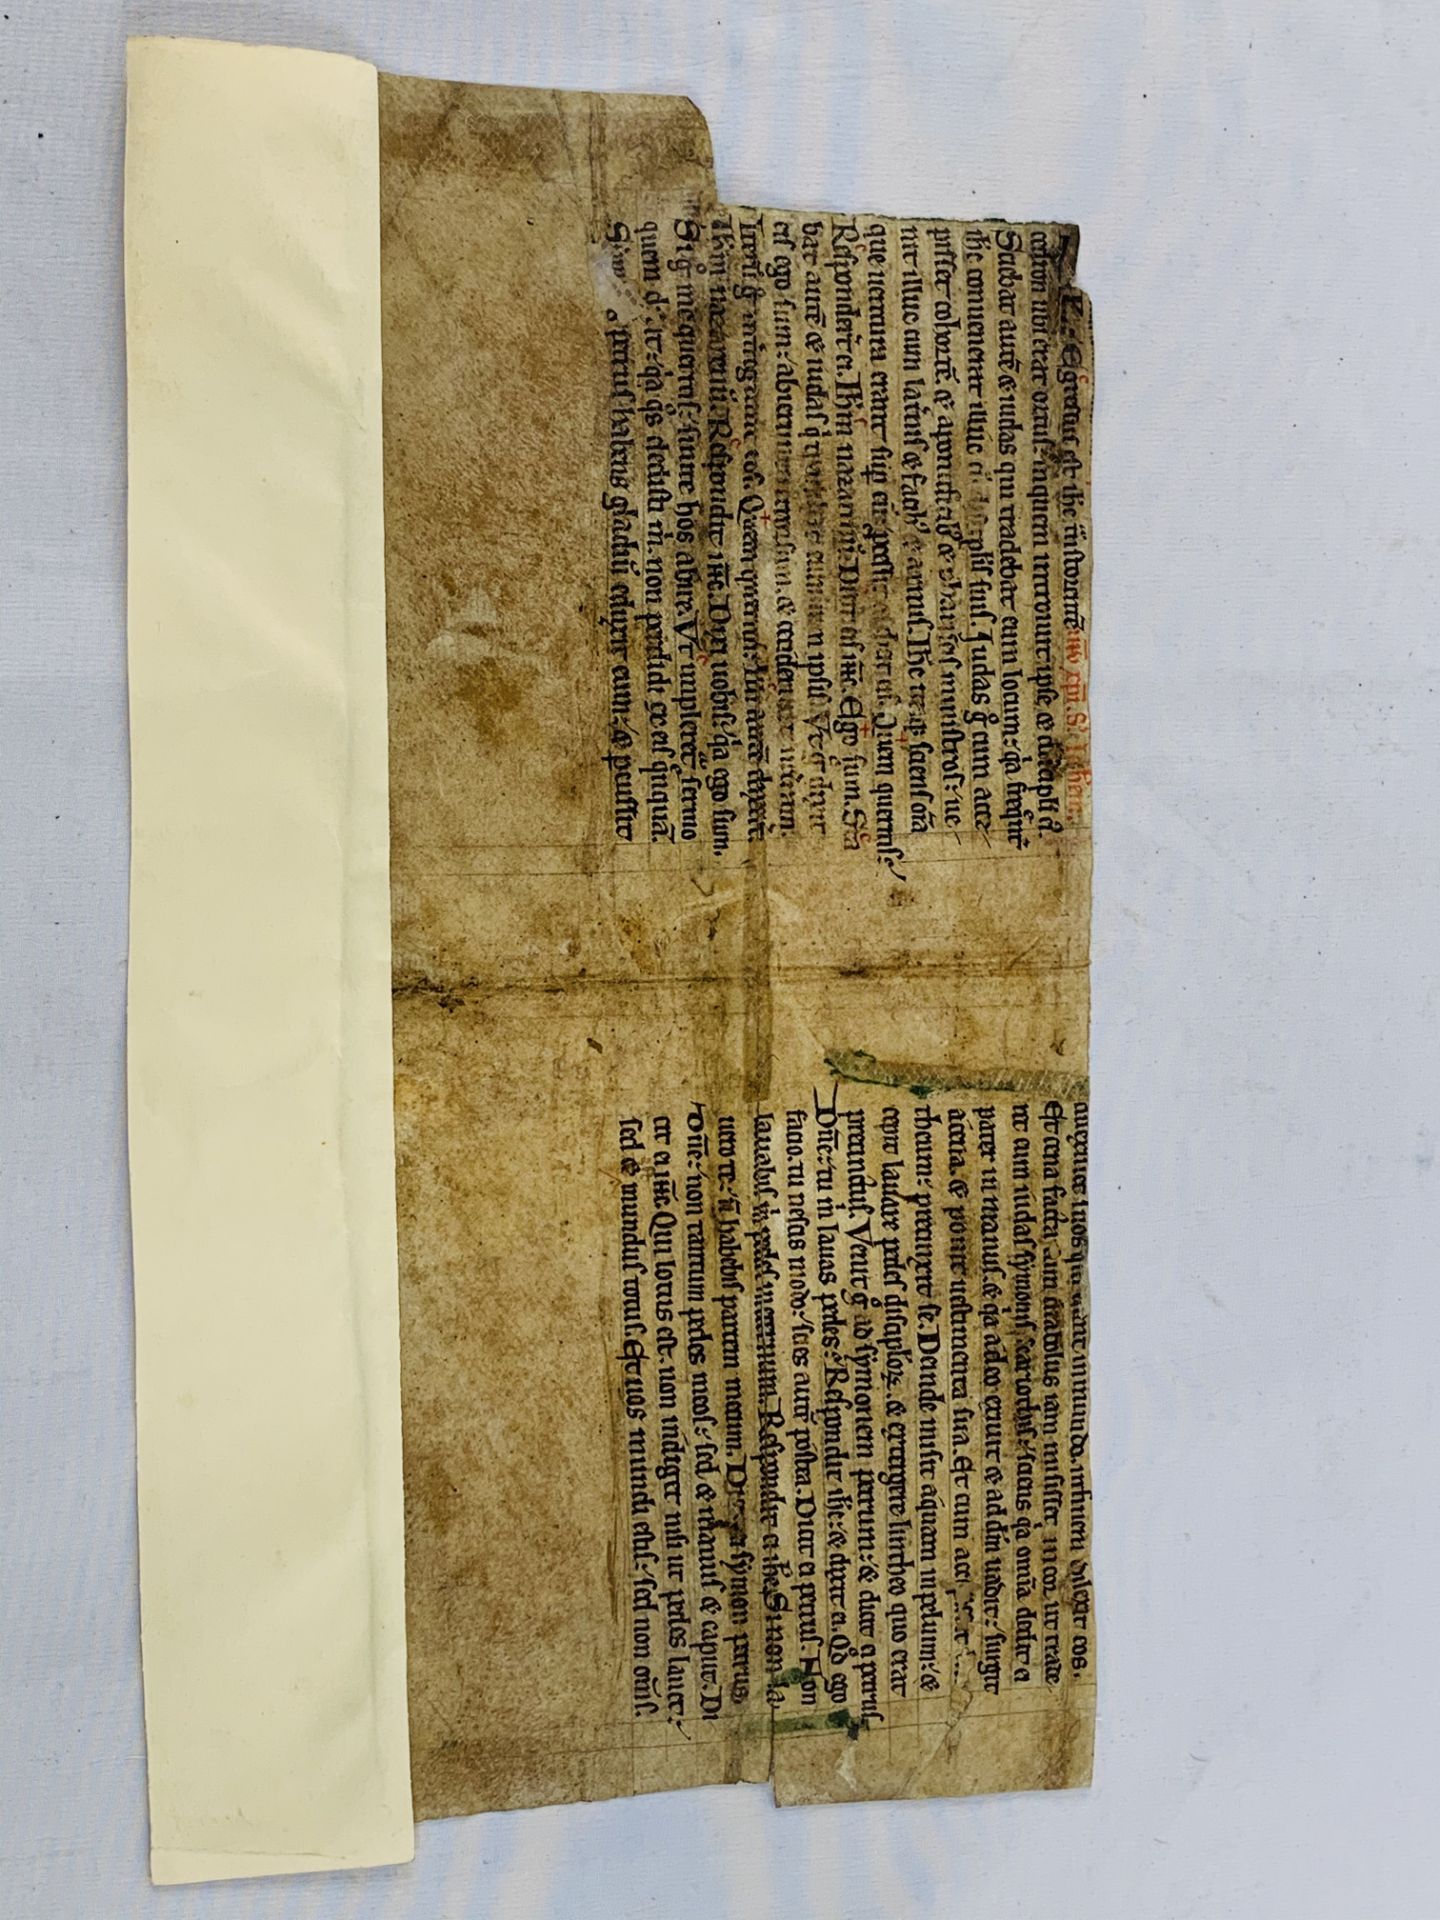 Medieval manuscript fragment of a bible, two leaves, dated circa 1150-1200